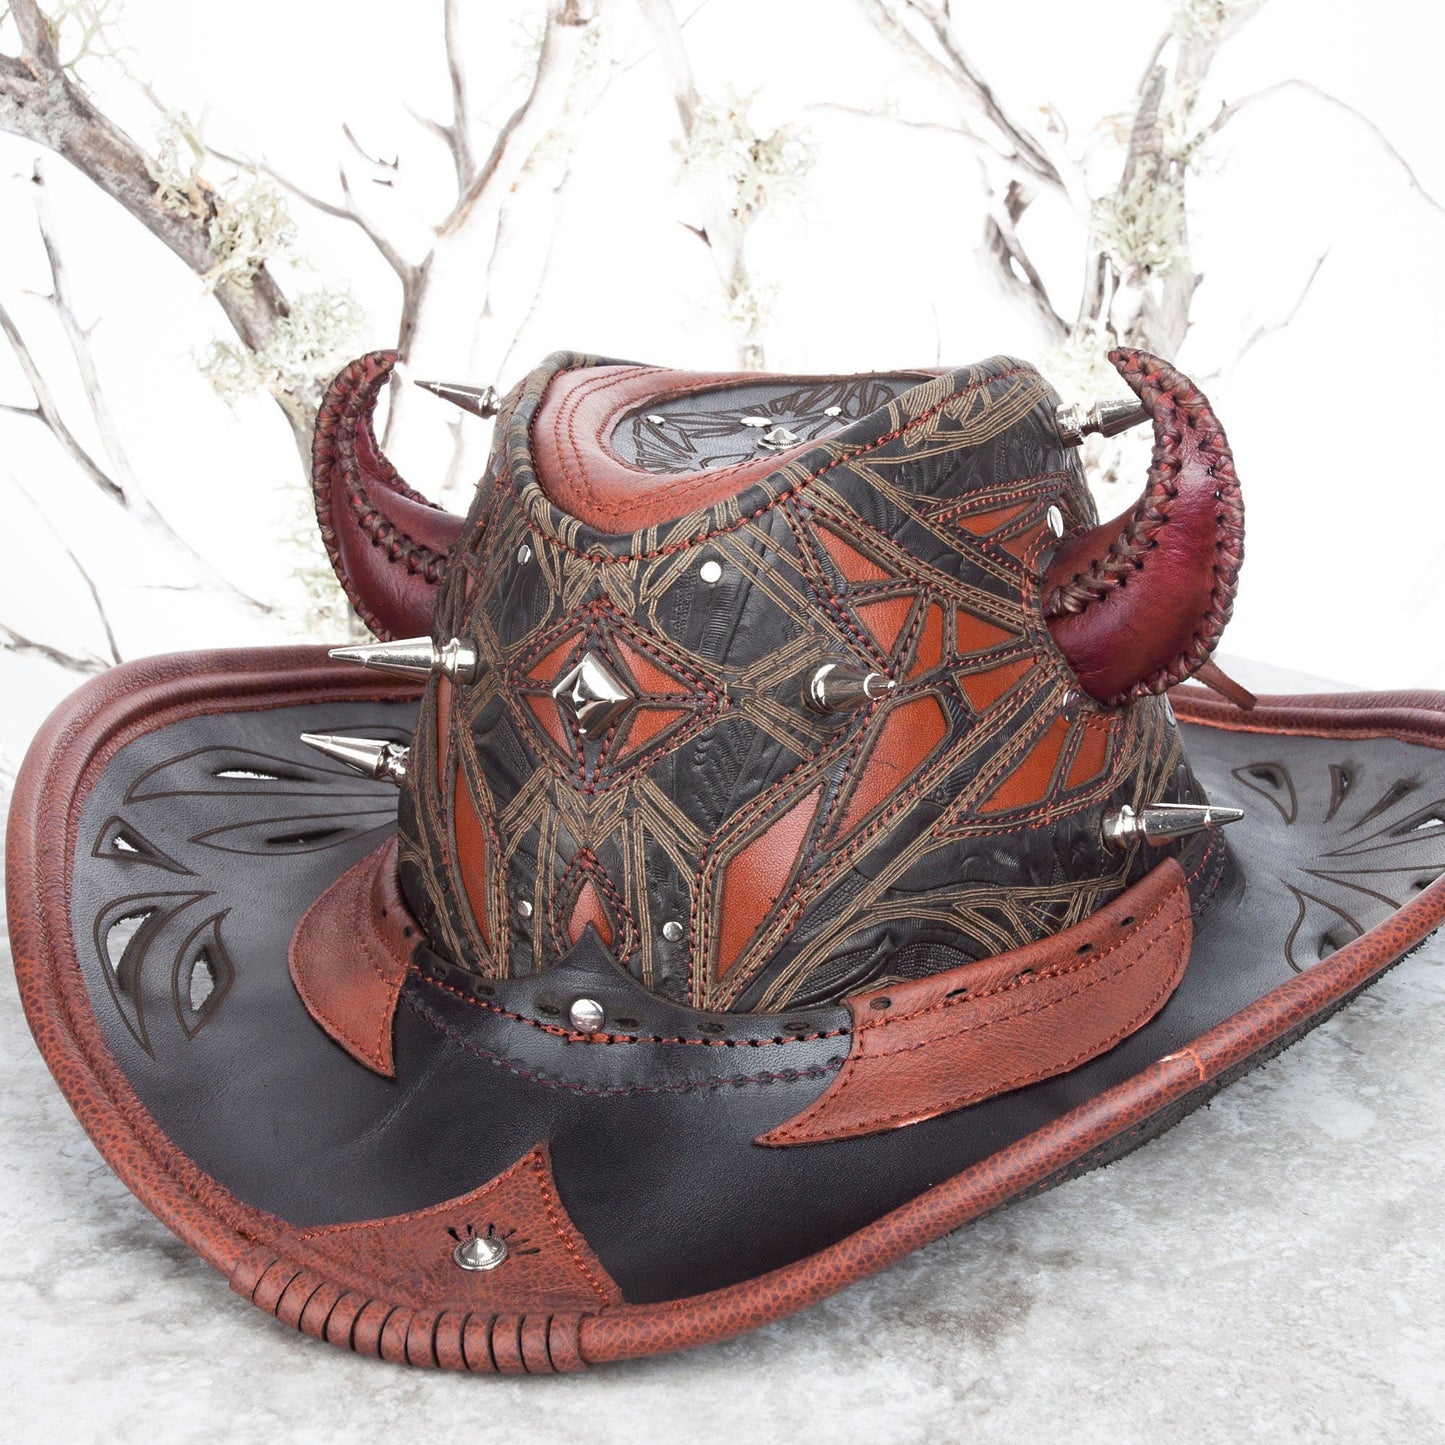 Custom Leather Cowboy Hat With Spikes & Filigree Pirate Eyepatch for Brad